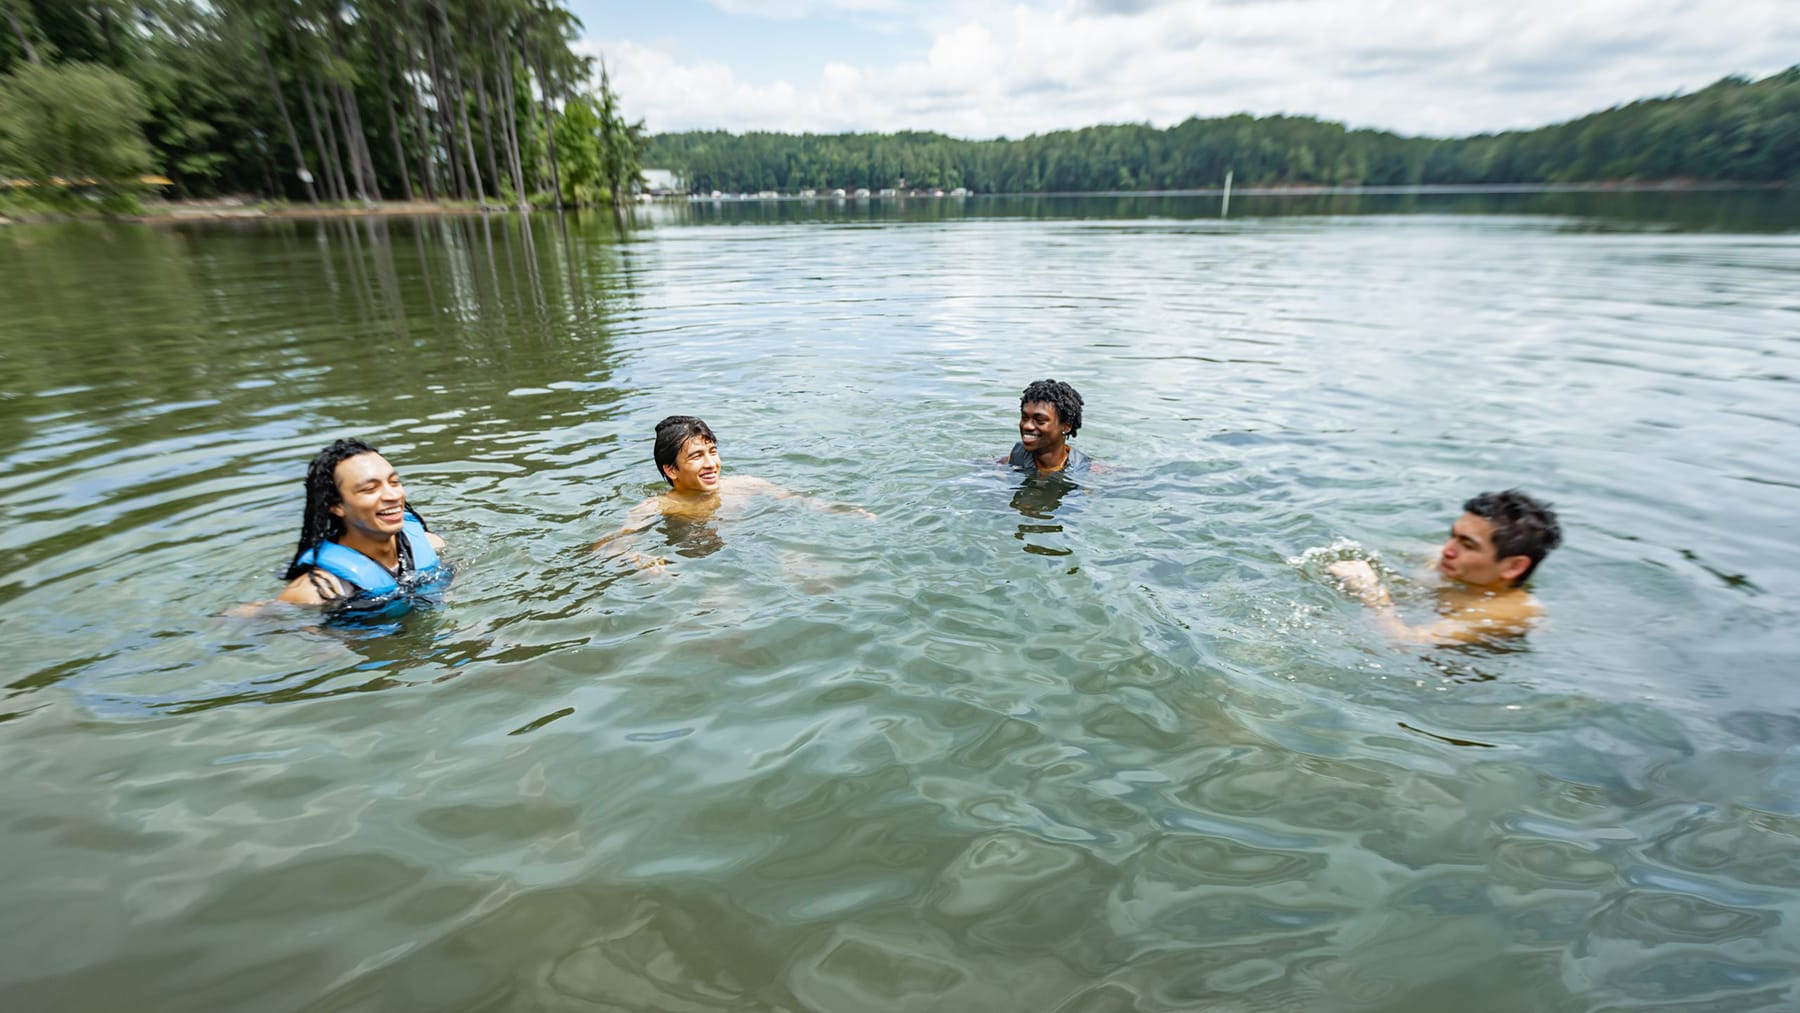 Young men swimming safely together in a lake. Some have life jackets on.